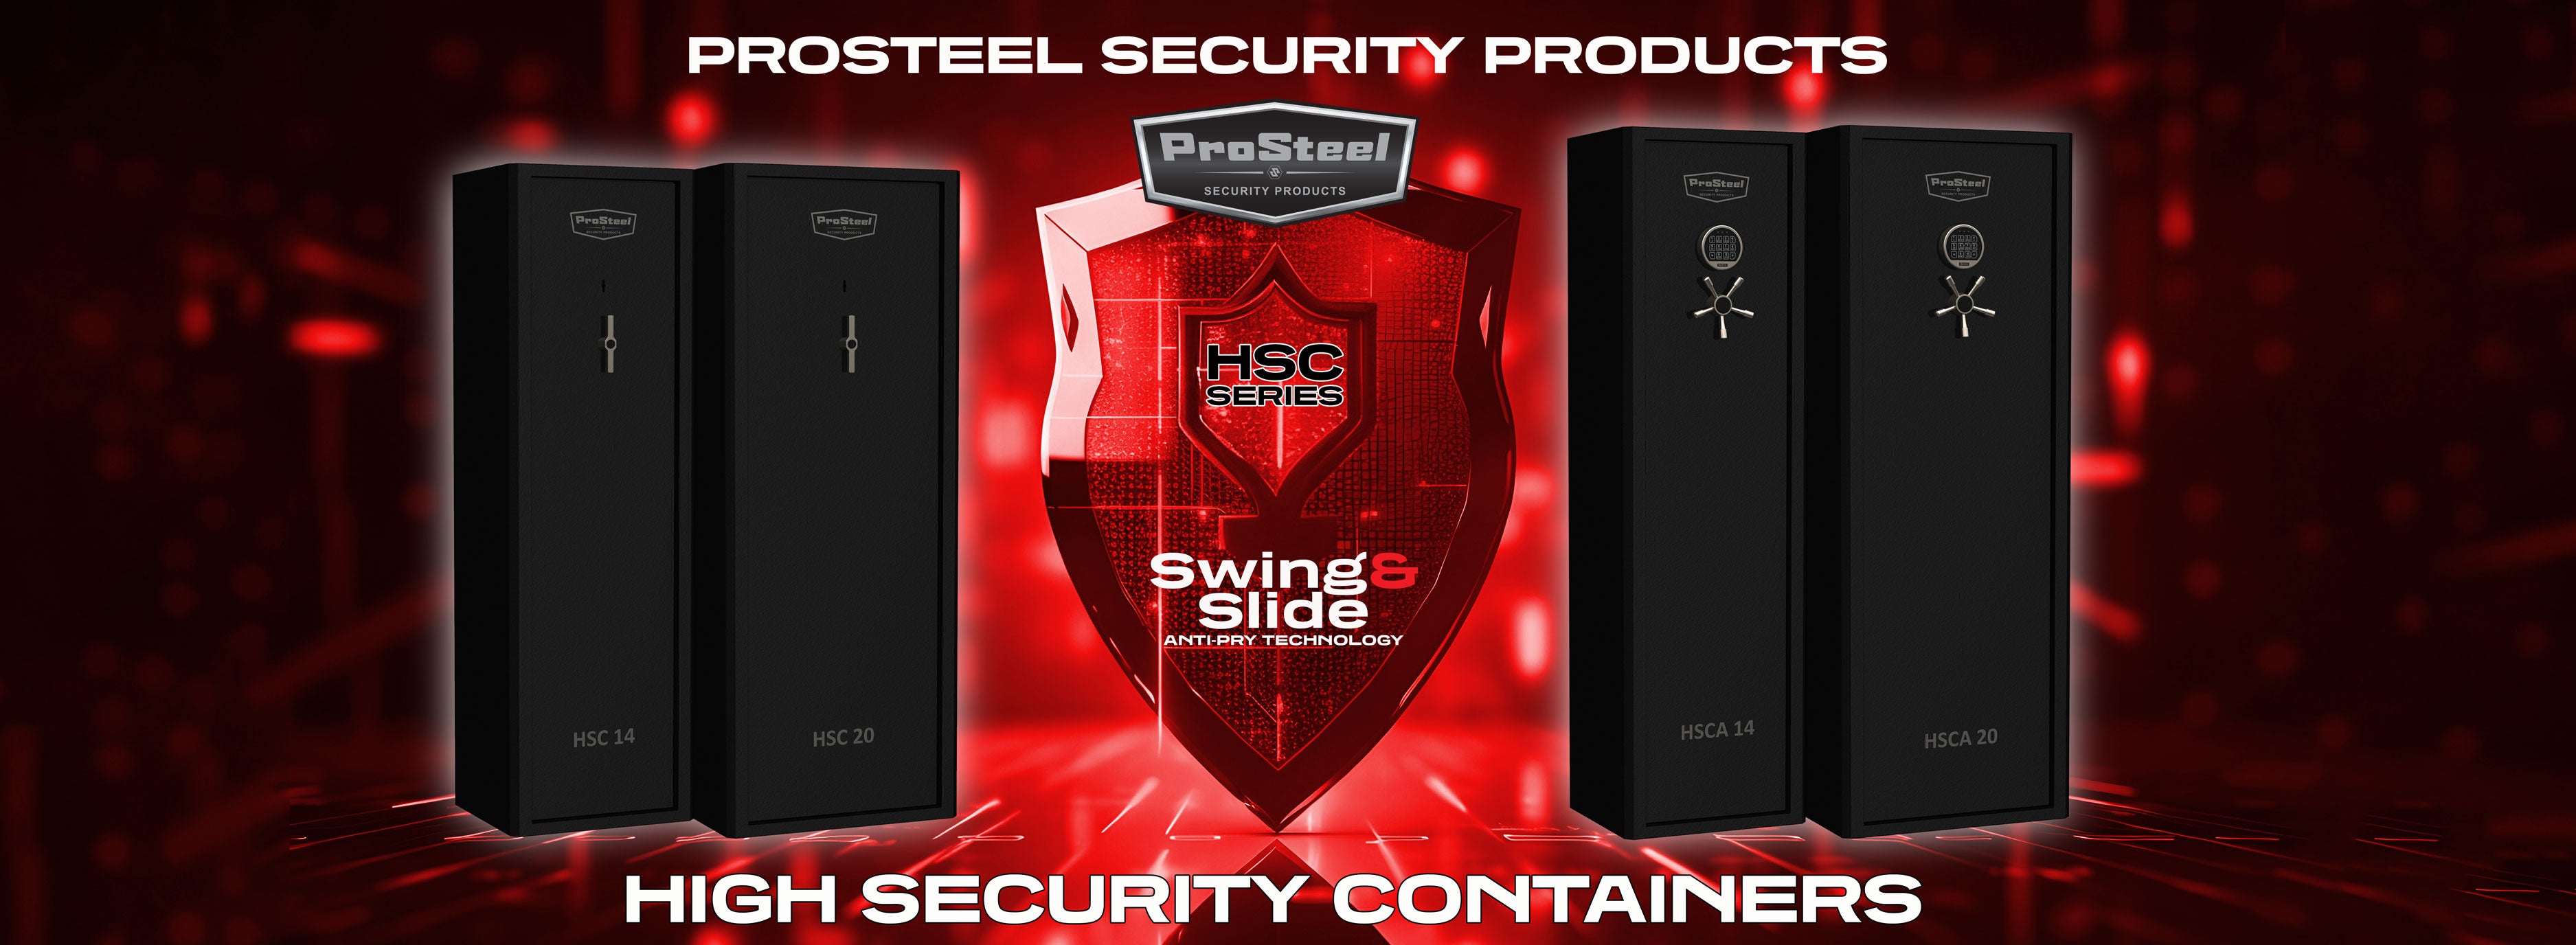 ProSteel's HSC or High Security Containers provide best in class security.